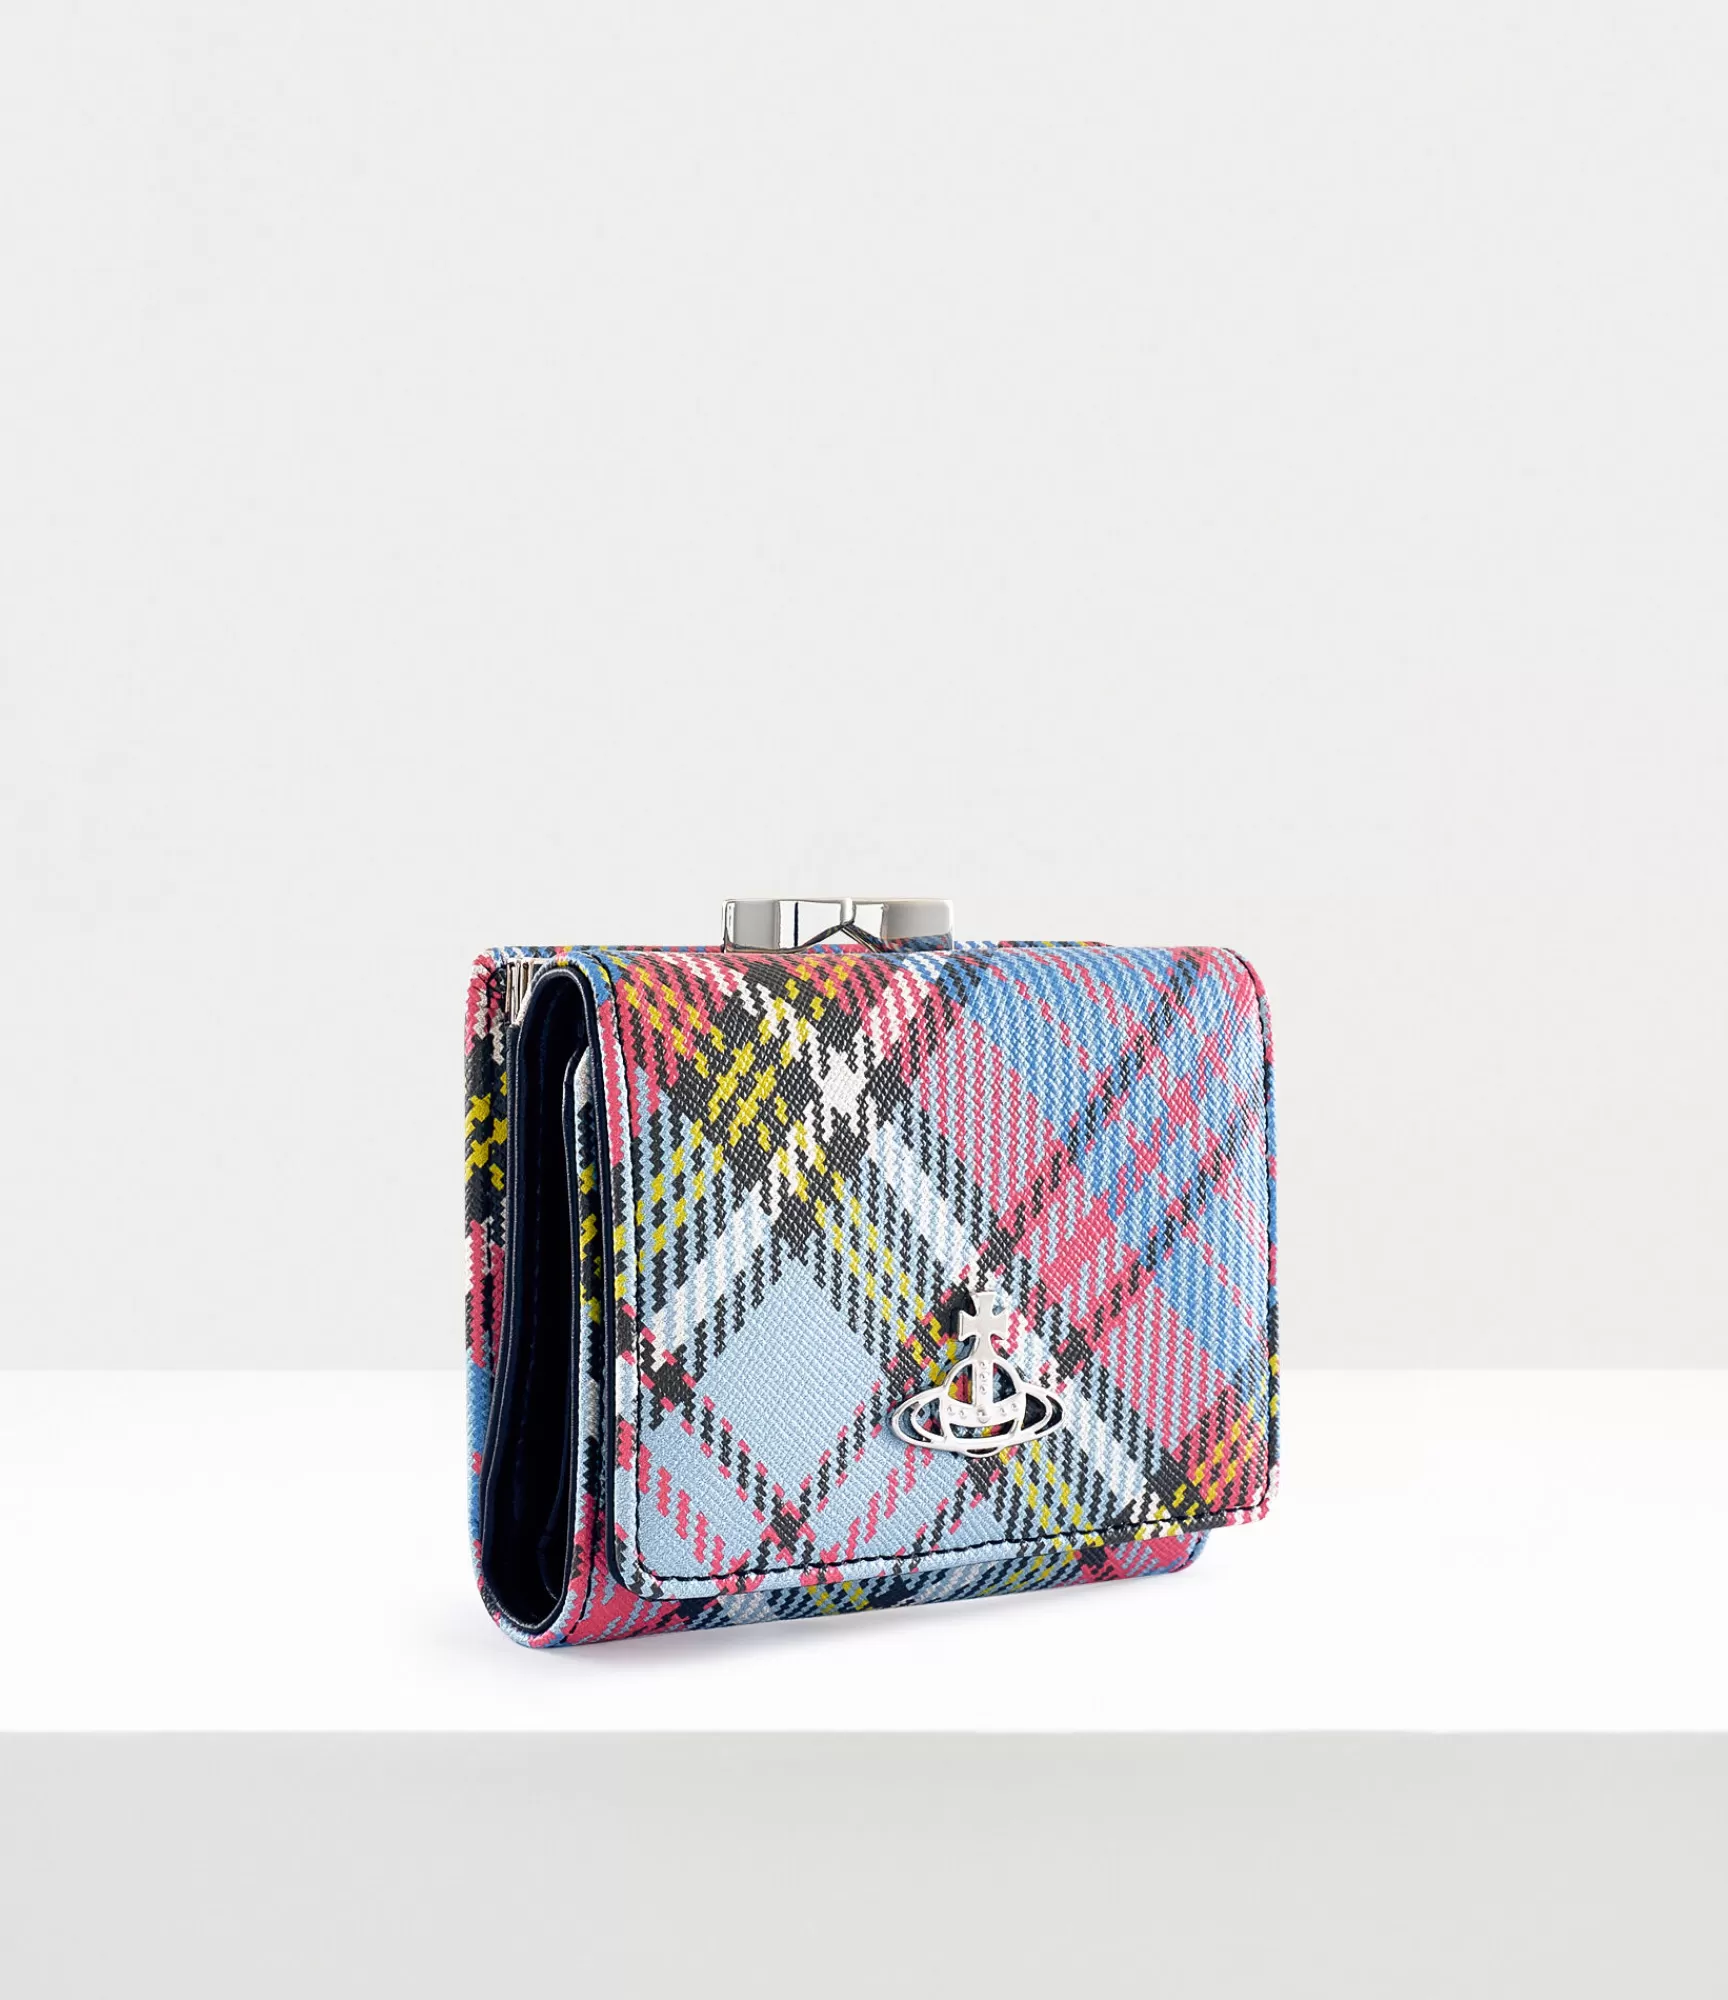 Vivienne Westwood Wallets and Purses*BIOGREEN SAFFIANO PRINTED SMALL FRAME WALLET Macandy Tartan